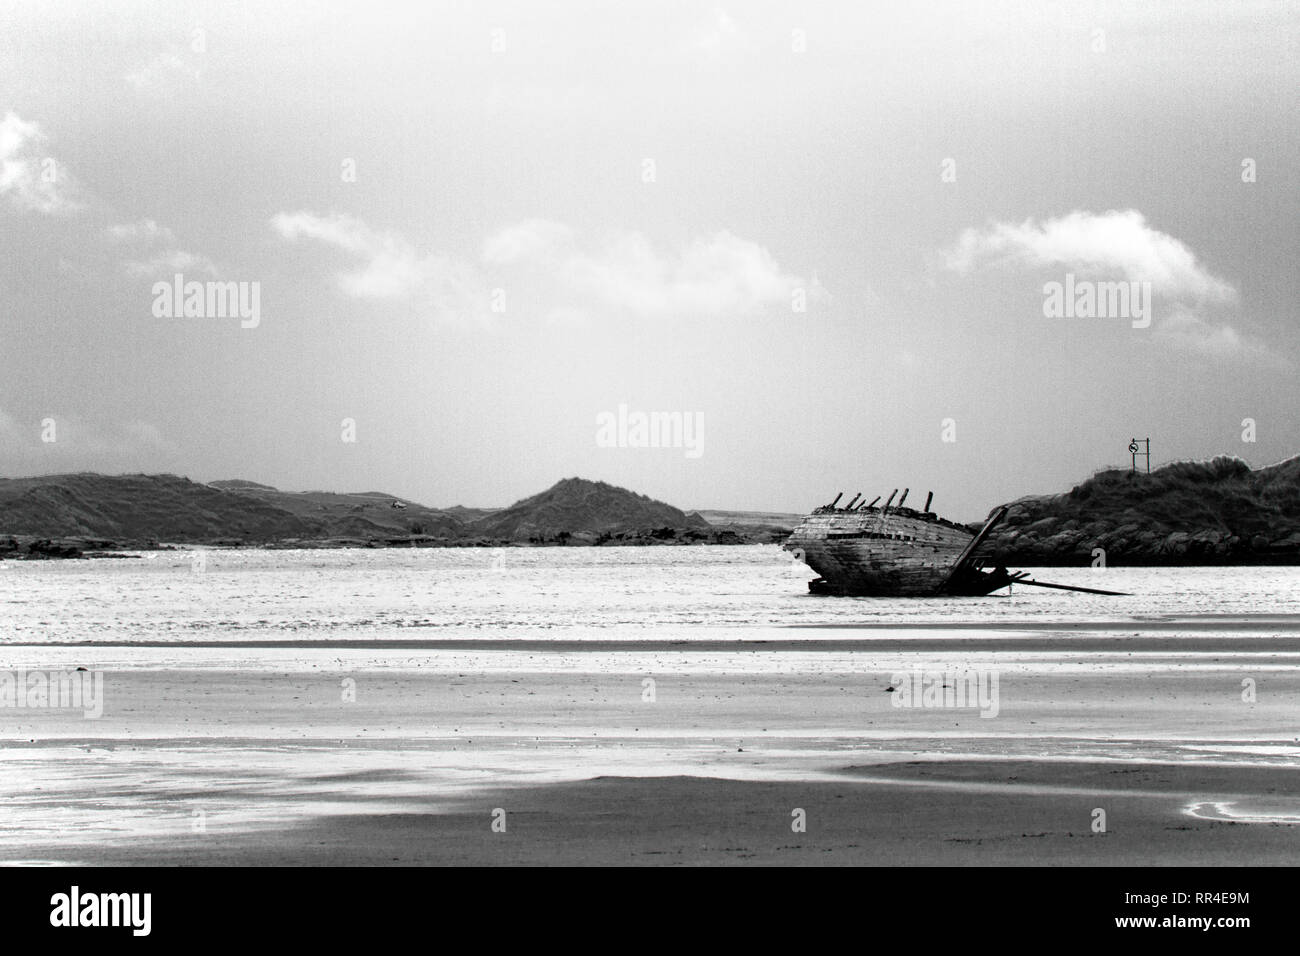 Eddie's Boat, Gweedore, Co. Donegal, irland Stockfoto